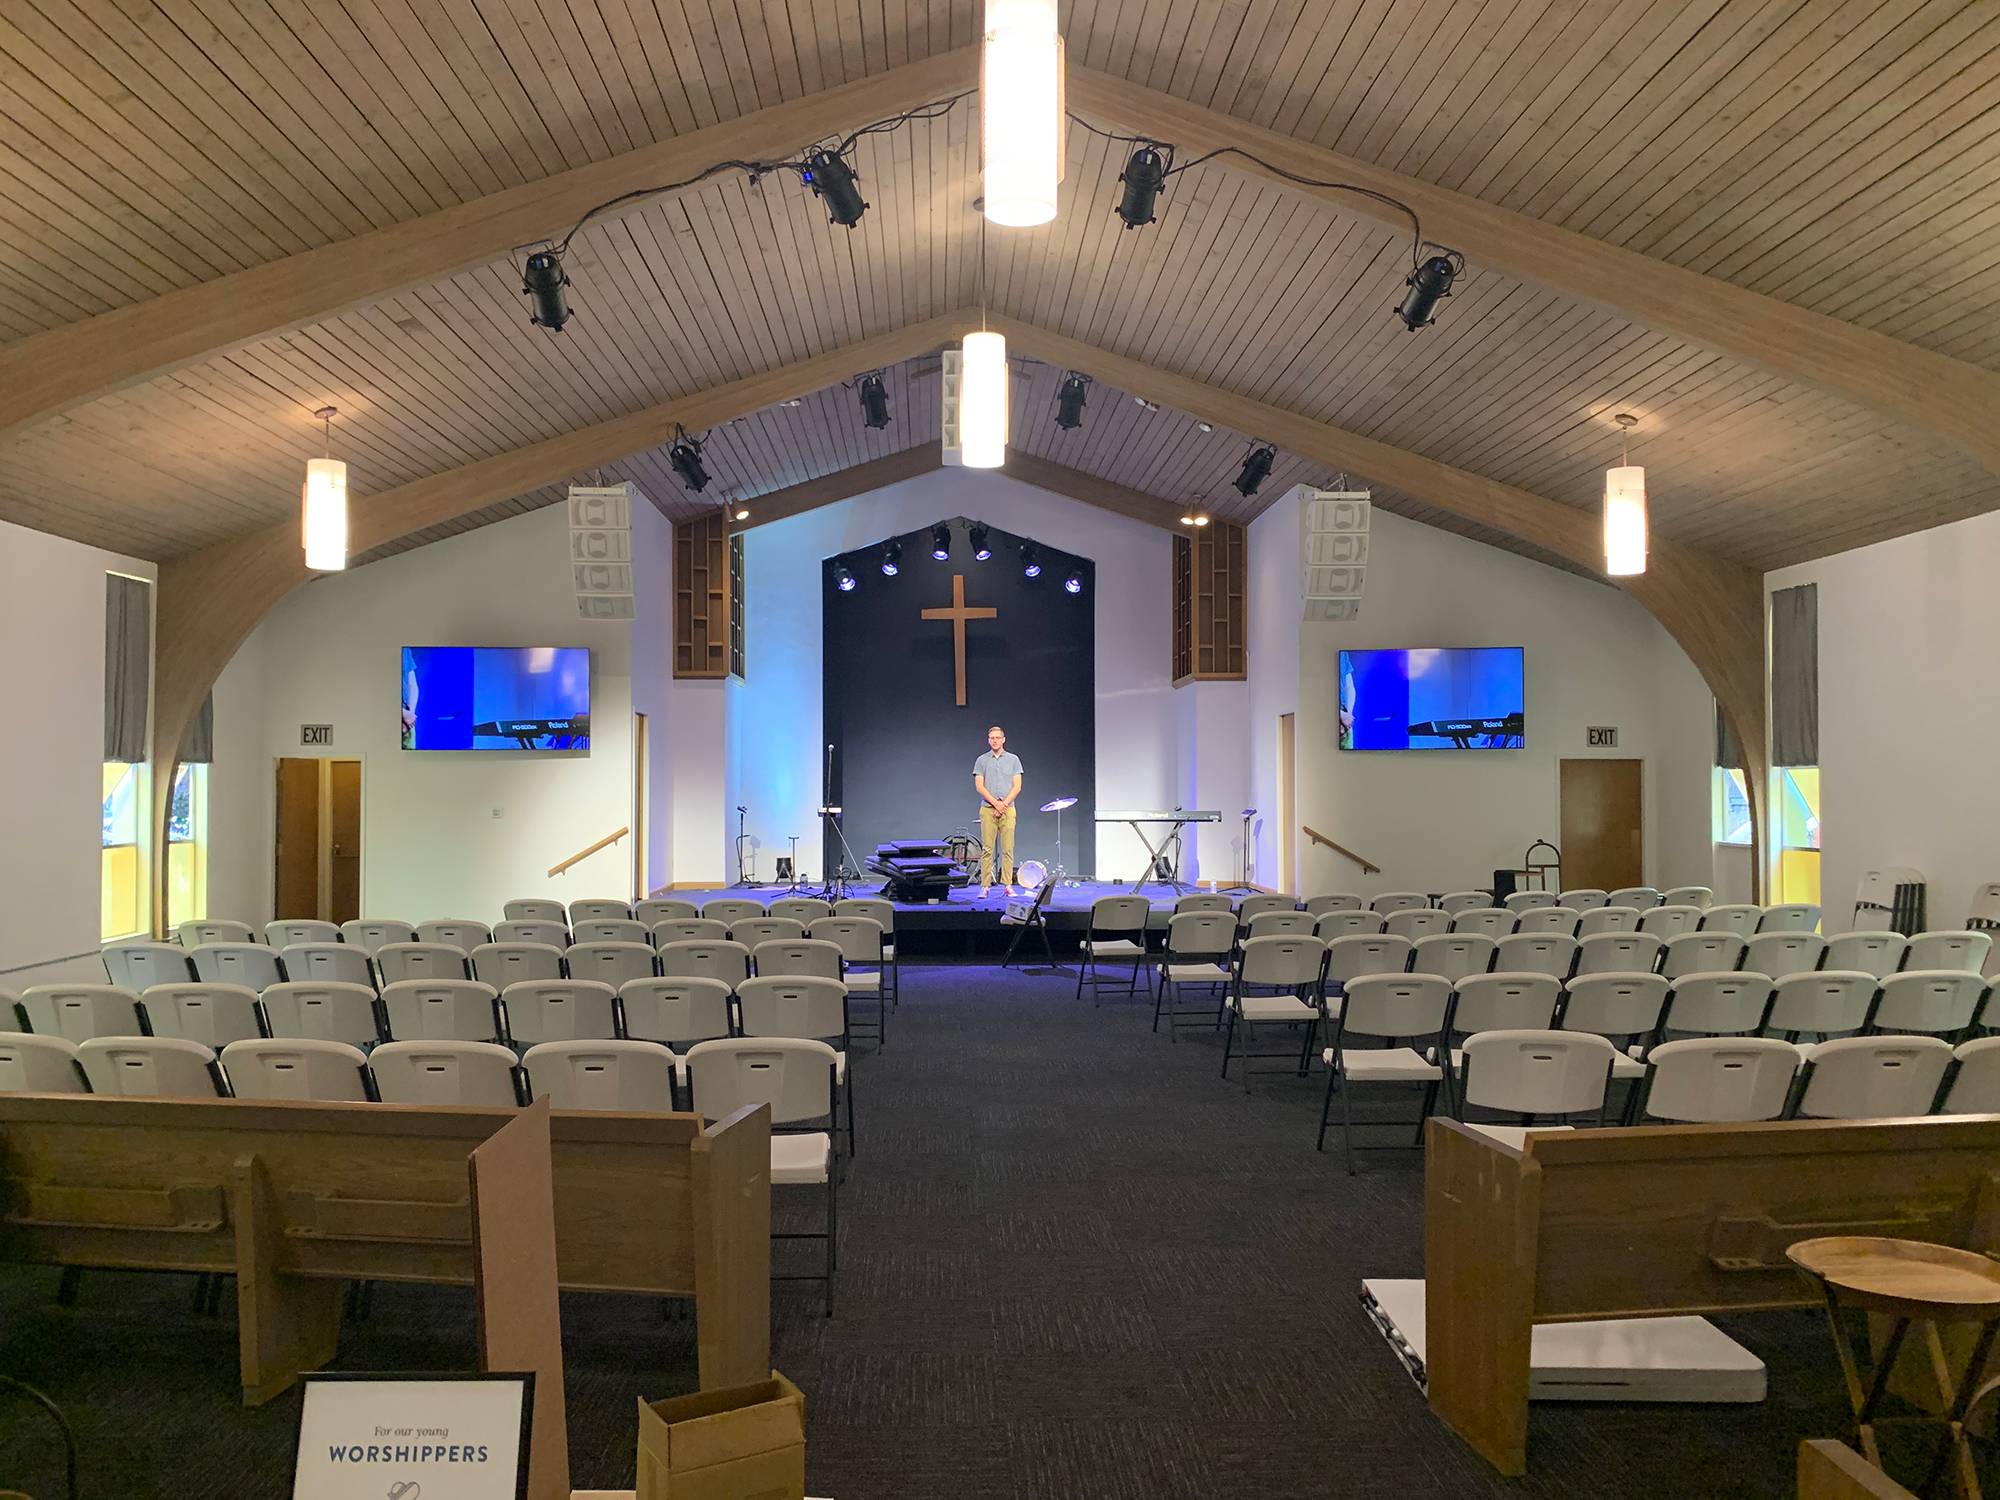 NEXO GEO M10 brings a rock & roll vibe to The Hallows Church in Seattle